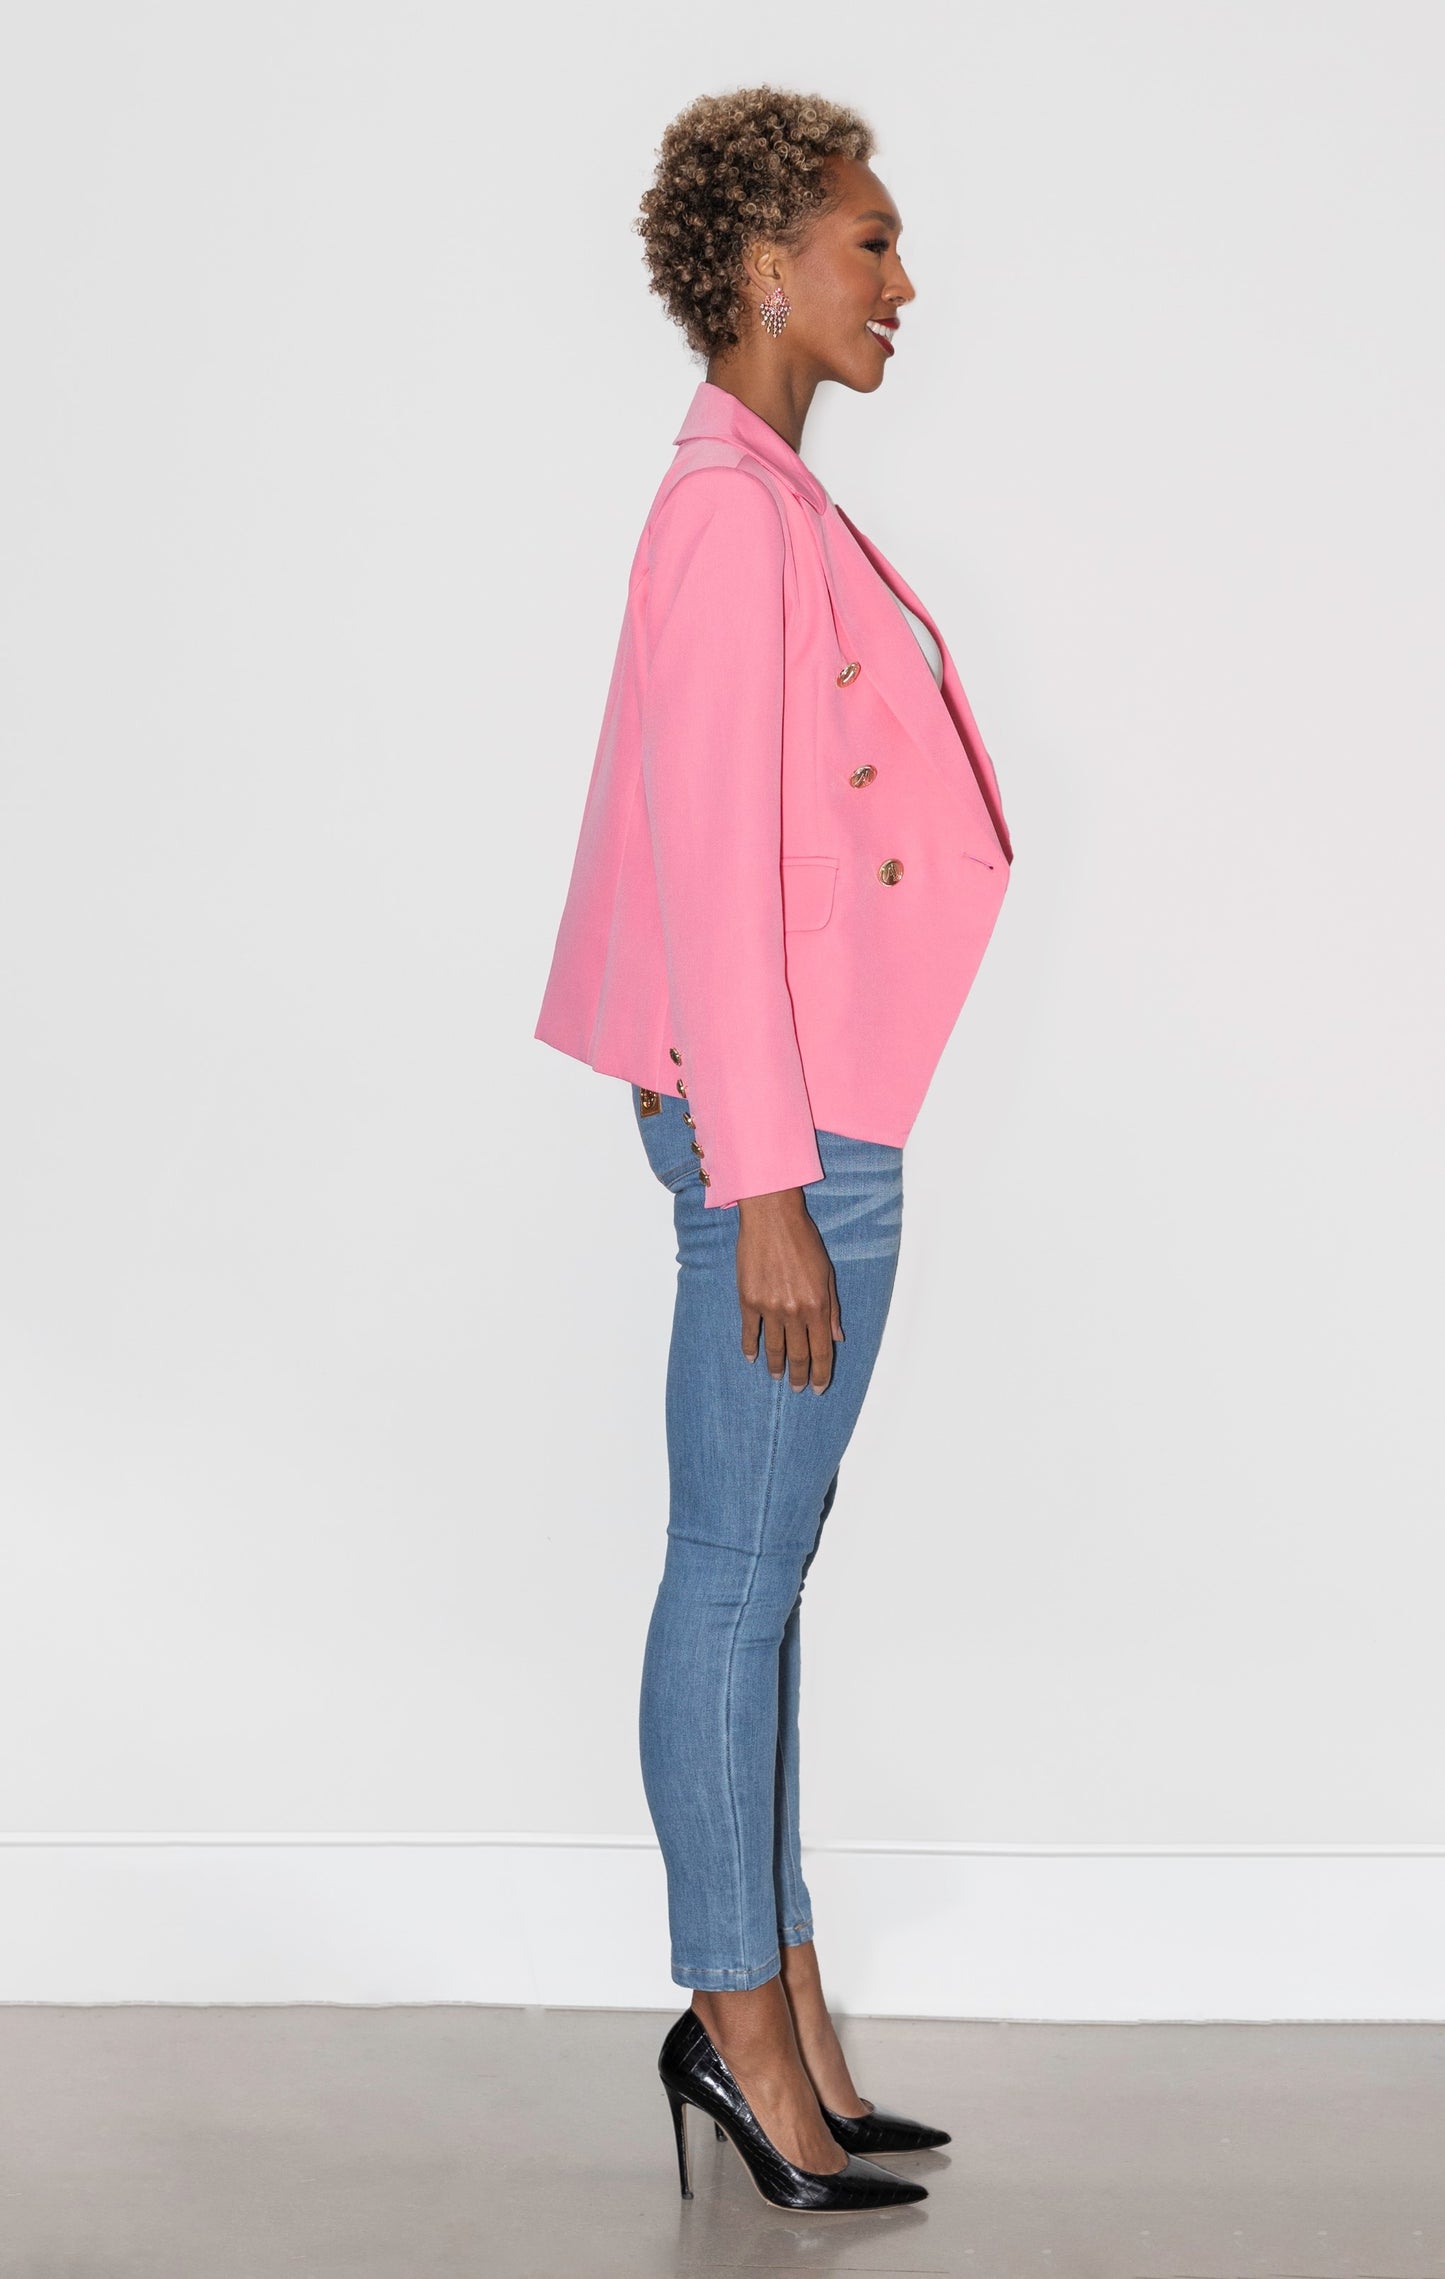 JACKET -The Audrey Double- Breasted  Blazer